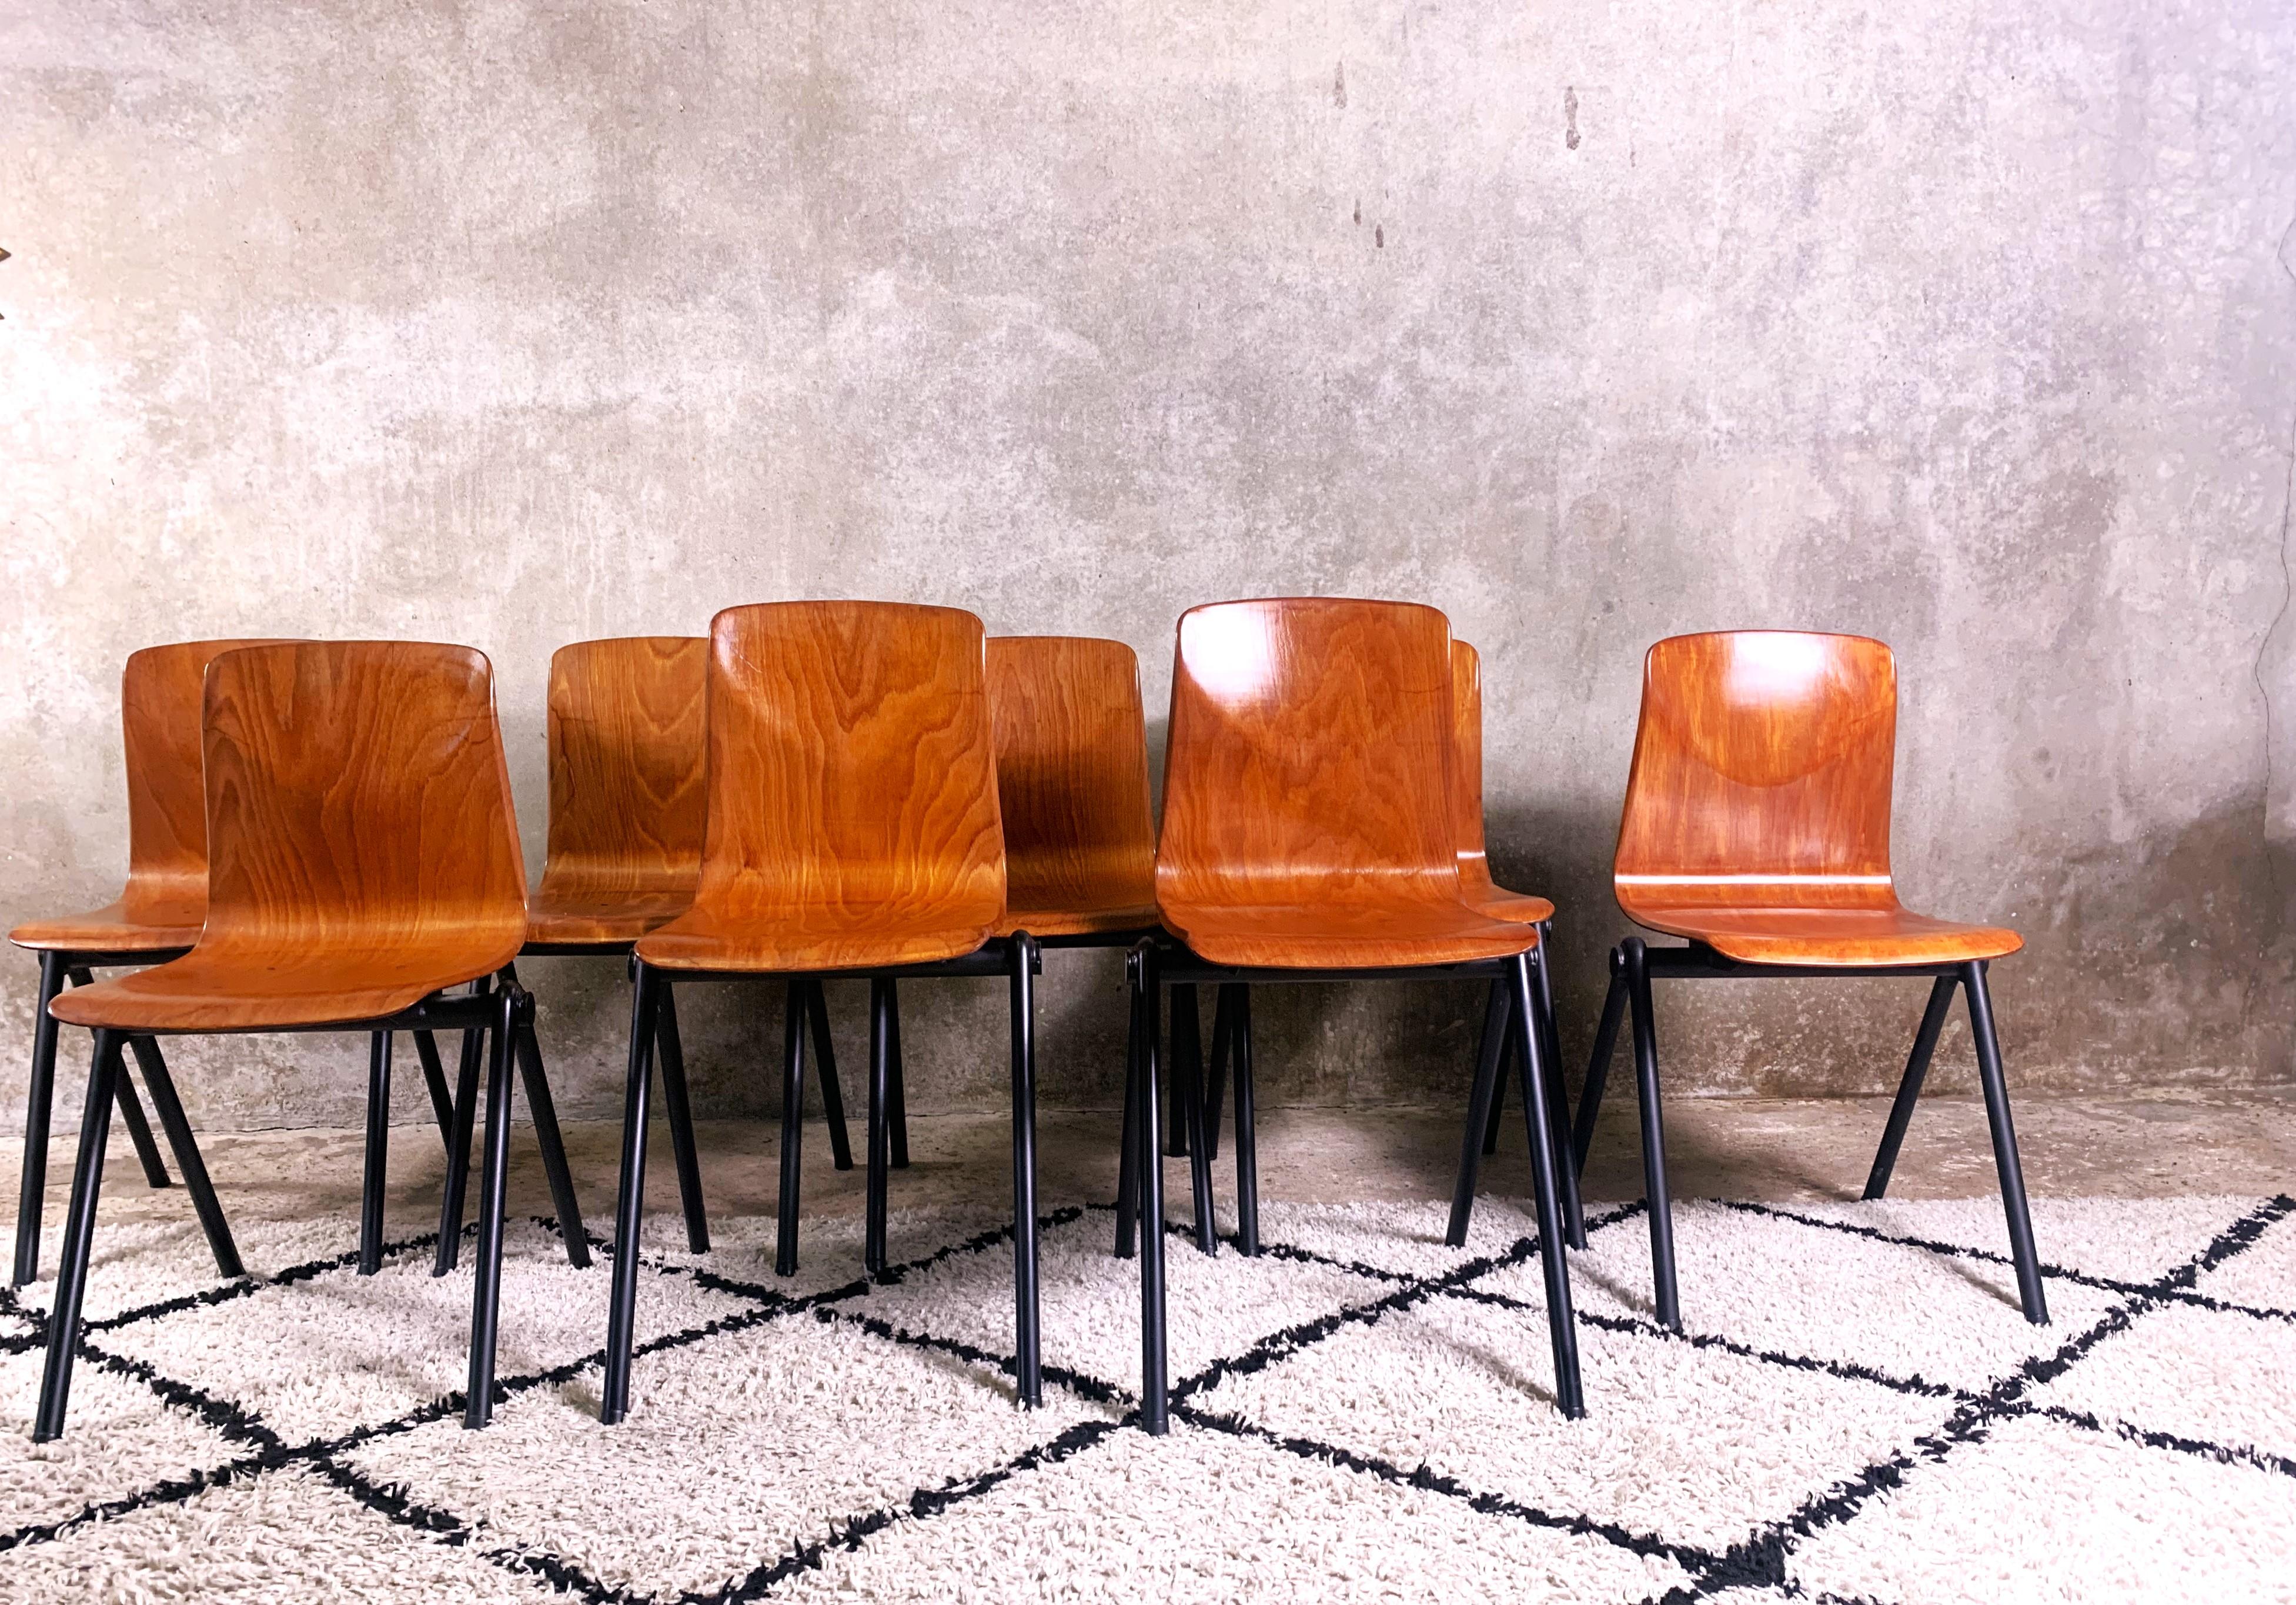 Characteristic Industrial chairs were created in 1967 by Galvanitas, Pagholz, (West Germany) and Thurop SA (in Switzerland).
These chairs with a pyramid frame are derived from the pyramid chairs by Wim Rietveld. The chairs also have something of the